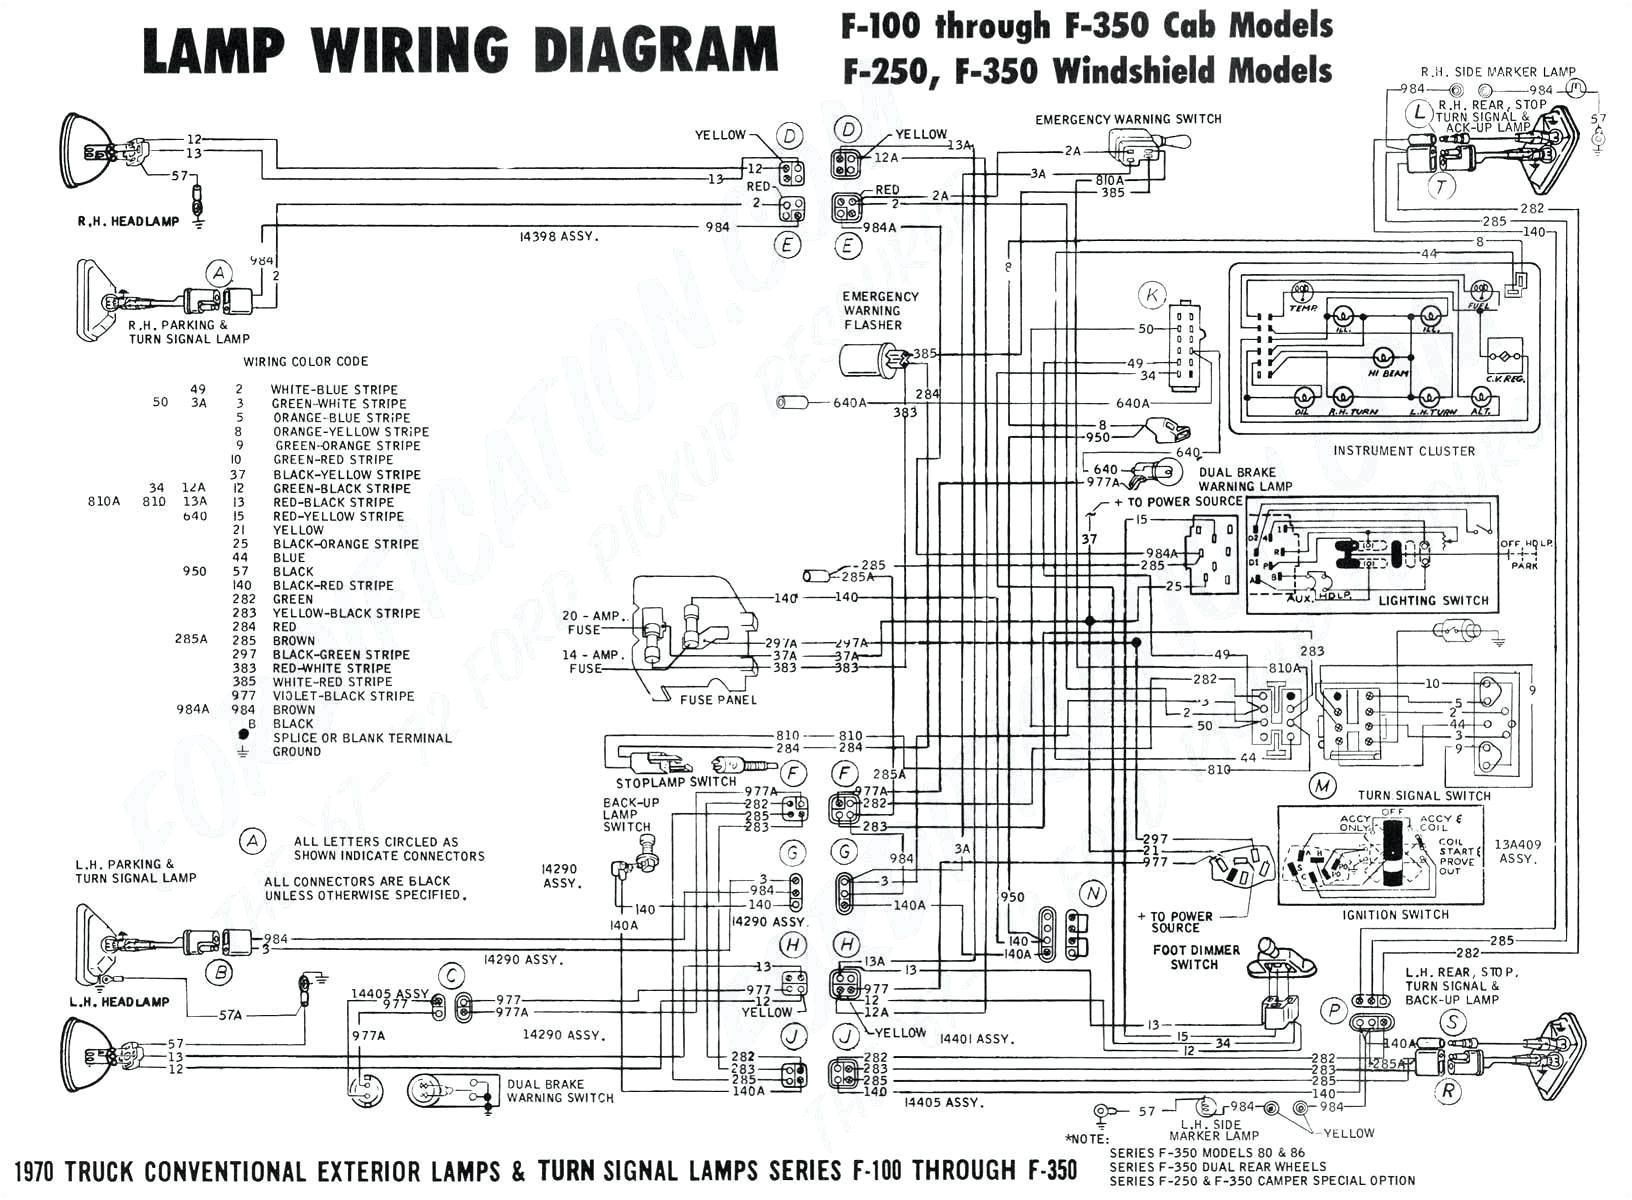 wiring diagram furthermore black and white electrical wires likewise wiring diagram furthermore diagram of a typical house wiring circuit